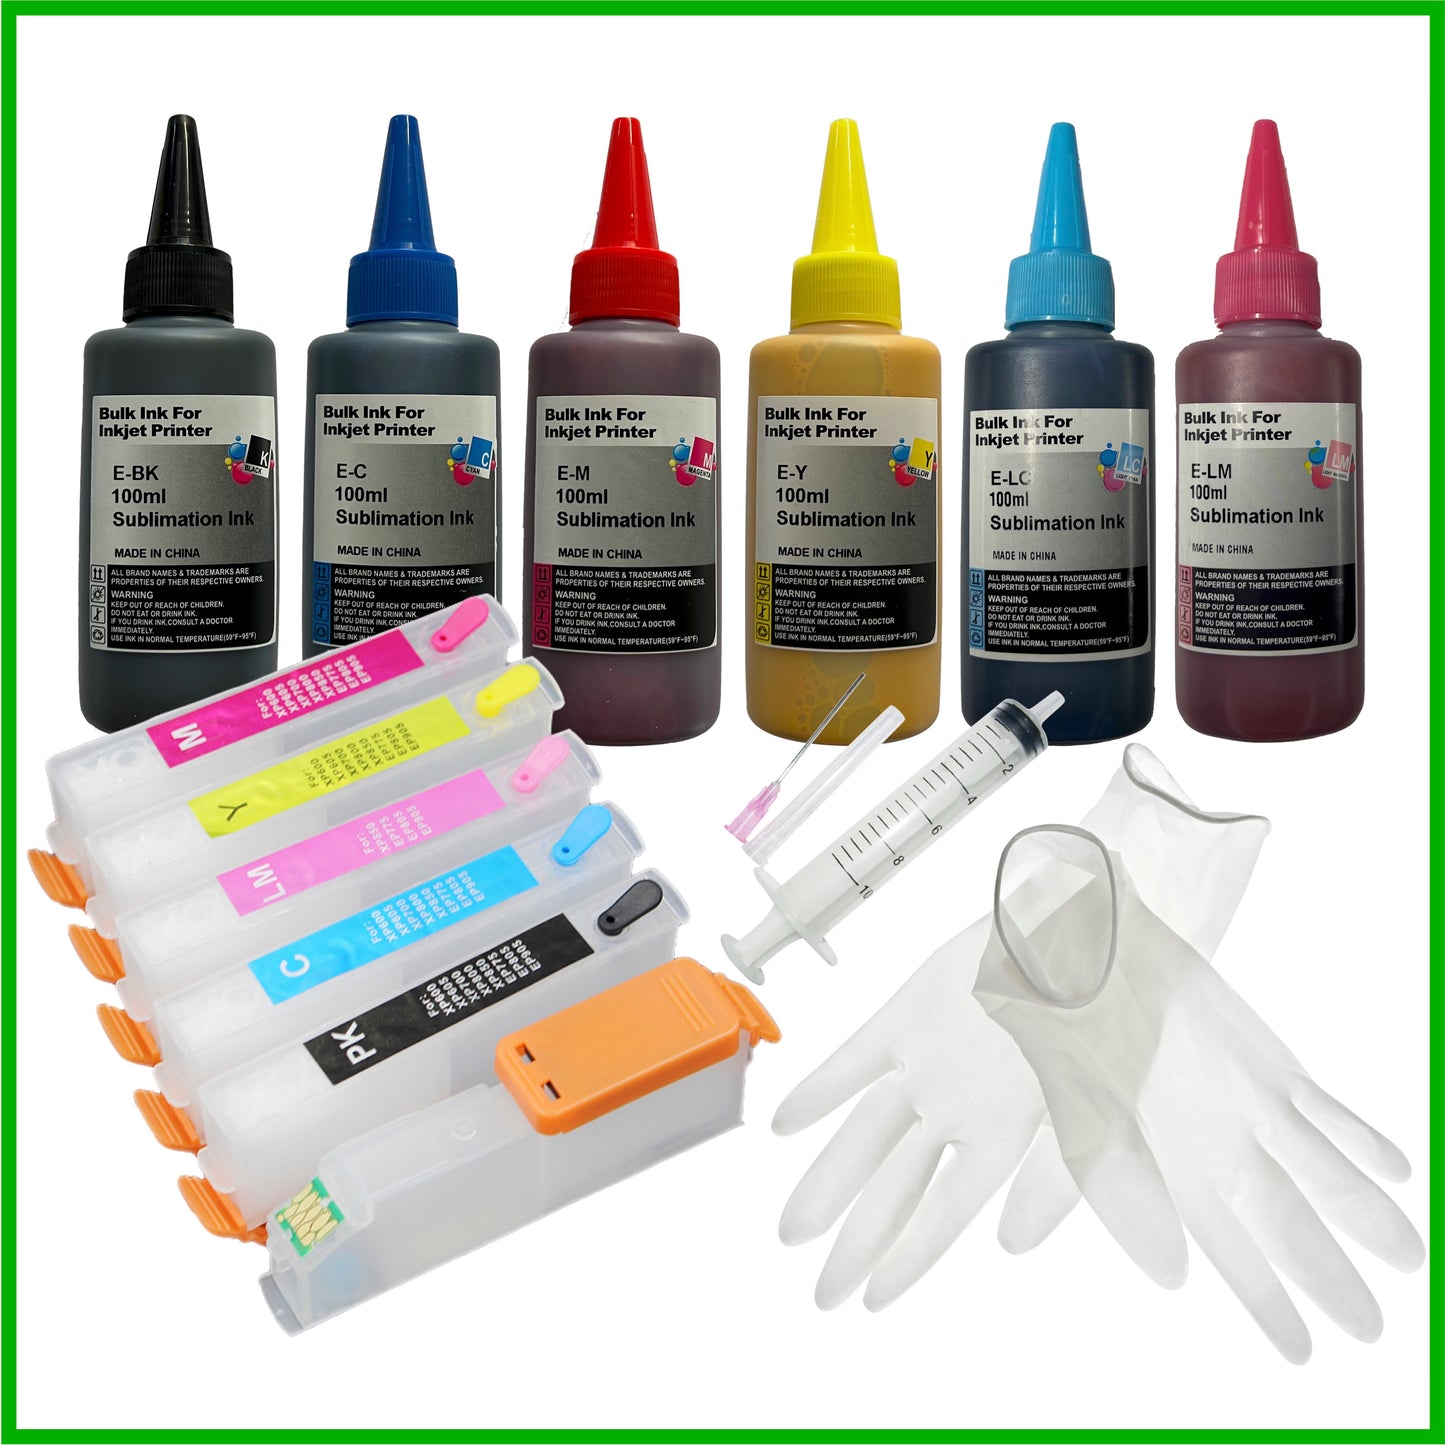 Sublimation Starter Kit - 24XL Cartridges with ARC Chip & Ink for Epson Expression Photo